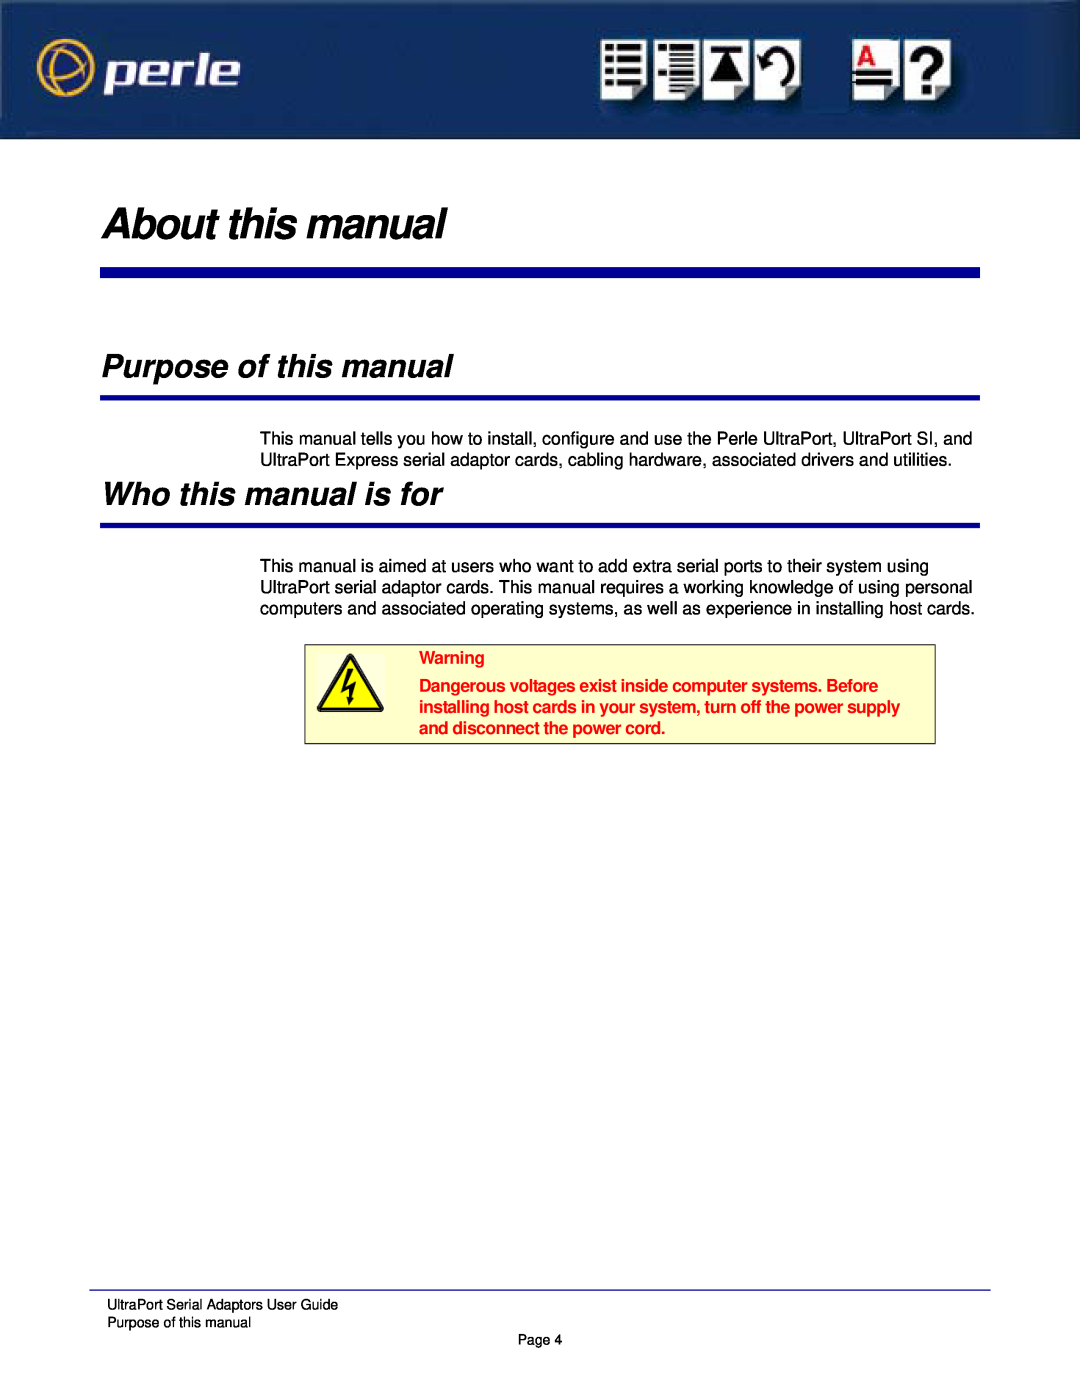 Perle Systems 5500152-23 About this manual, Purpose of this manual, Who this manual is for 